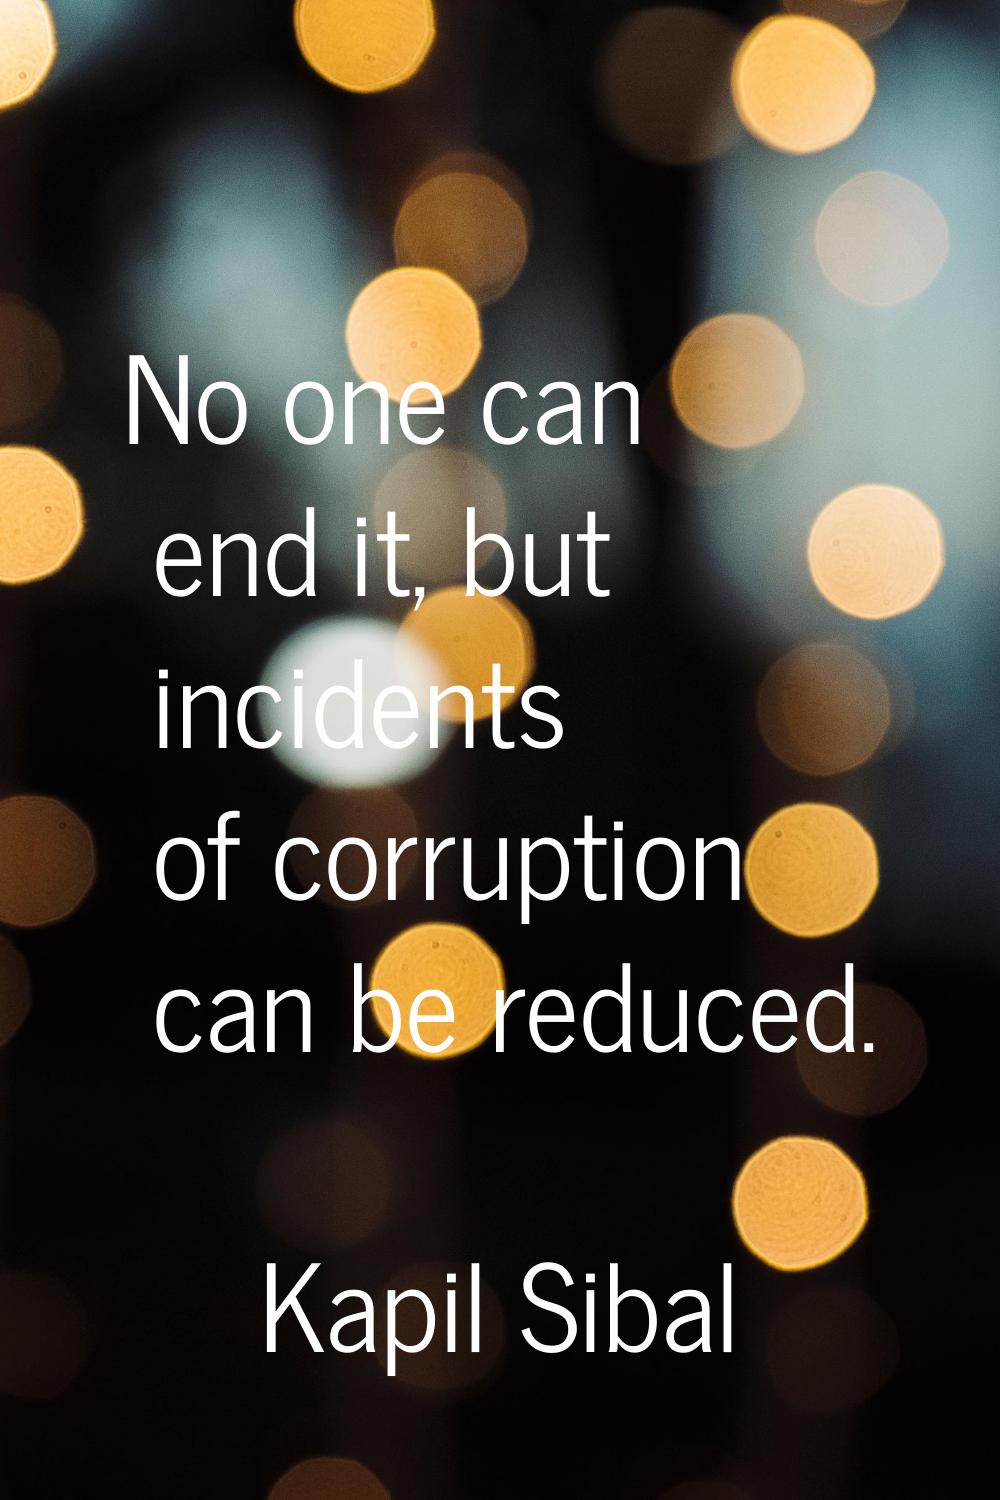 No one can end it, but incidents of corruption can be reduced.